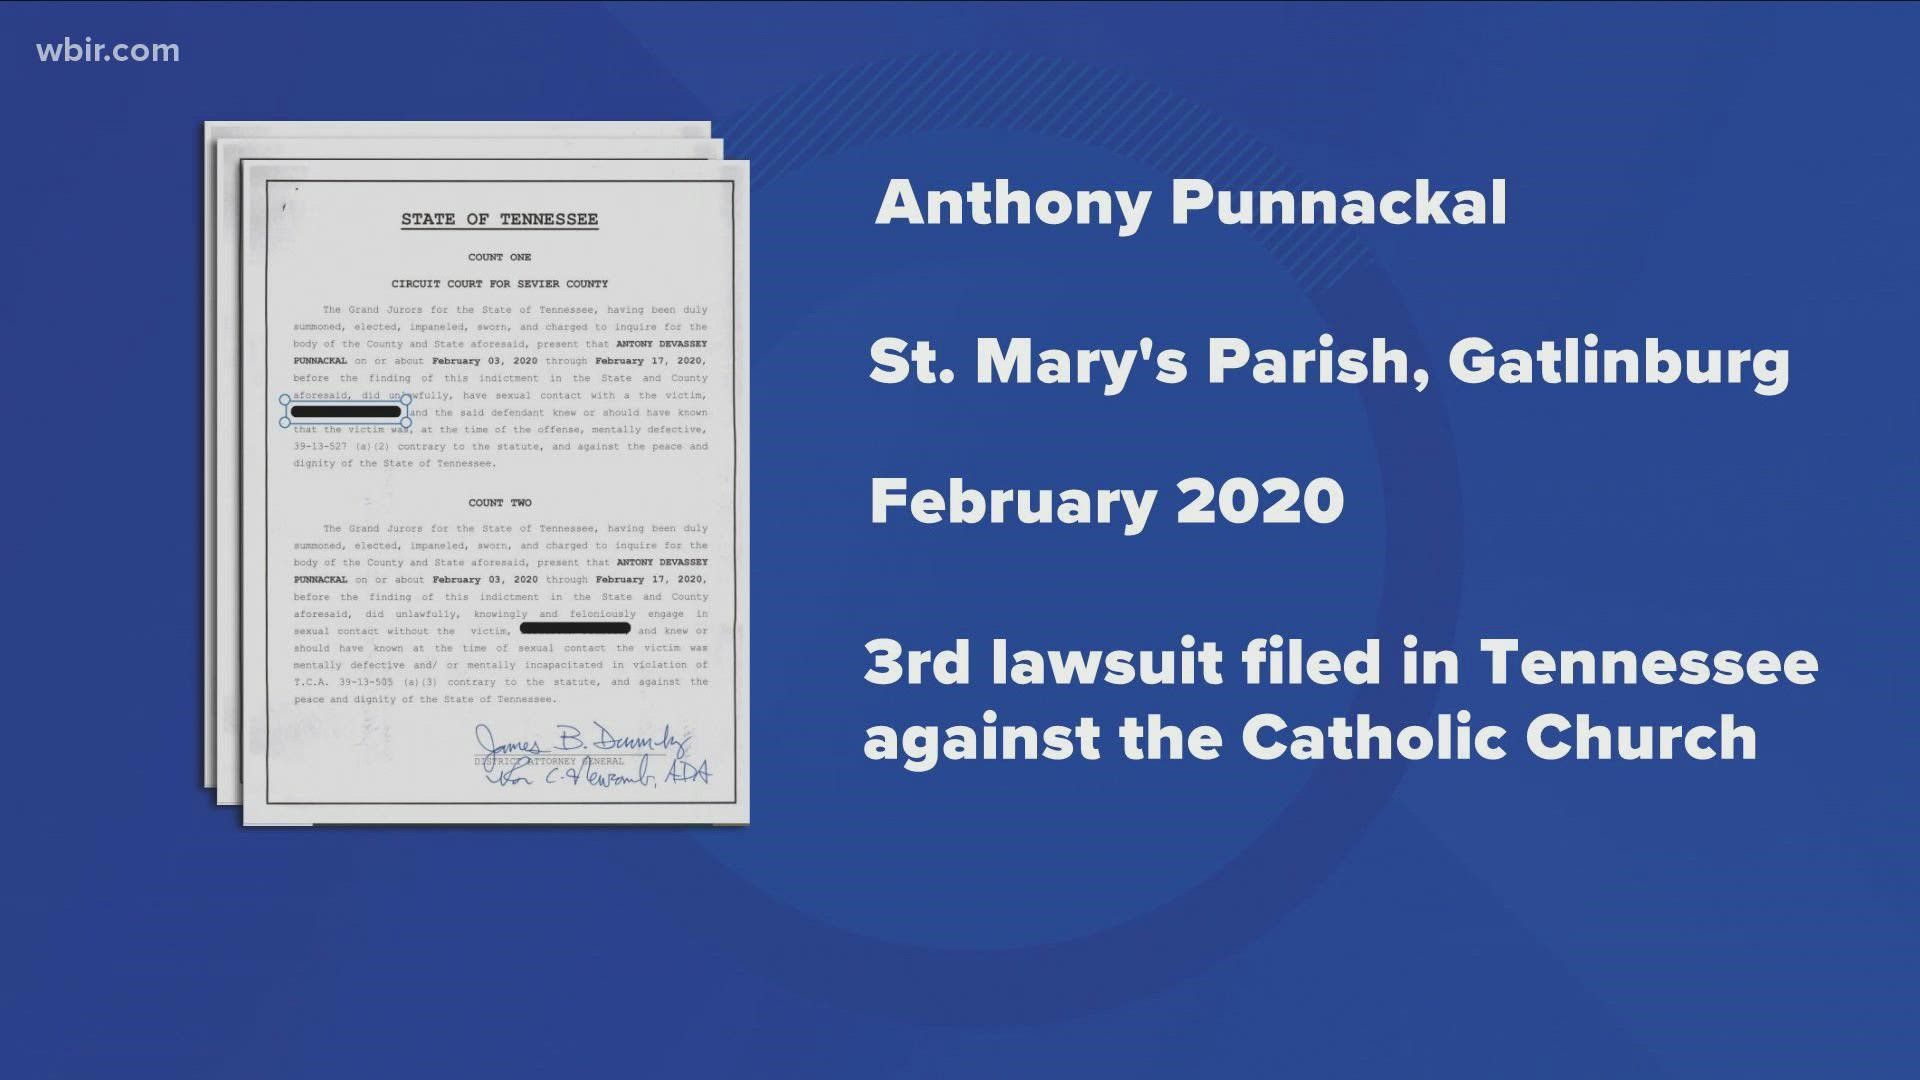 A woman says she was assaulted by father Anthony Punnackal back in in February 2020 while he was leading the Saint Mary's Parish in Gatlinburg.